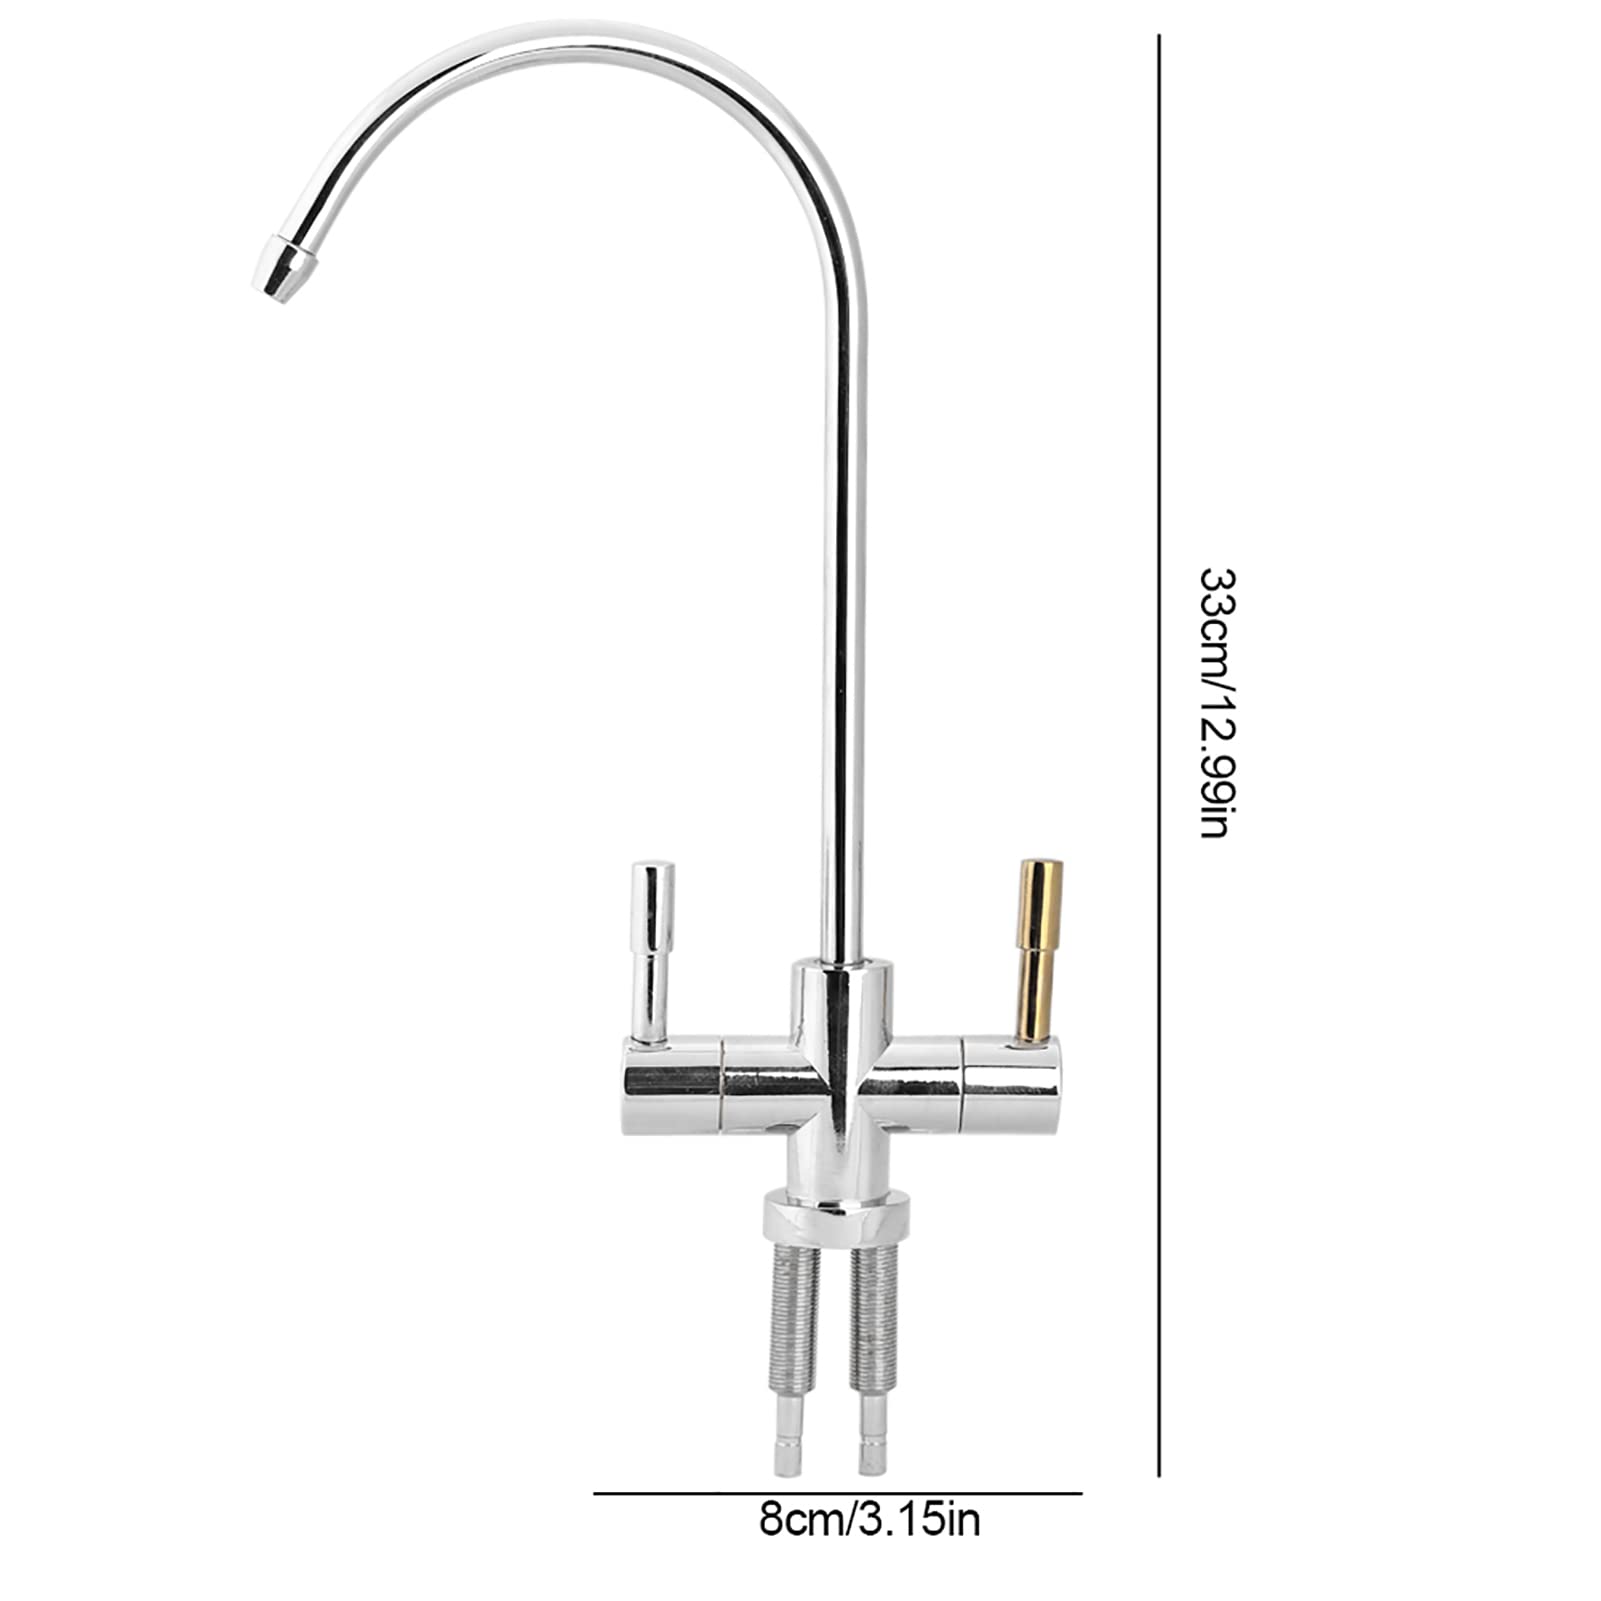 HOT Cold Double Holes Faucet Tap,plplaaoo Drinking Water Faucet,1/4inch Double Holes Sink Faucet Tap Chrome Reverse Osmosis RO Drinking Water Filter Fits All Under Counter Water Filter Systems.,